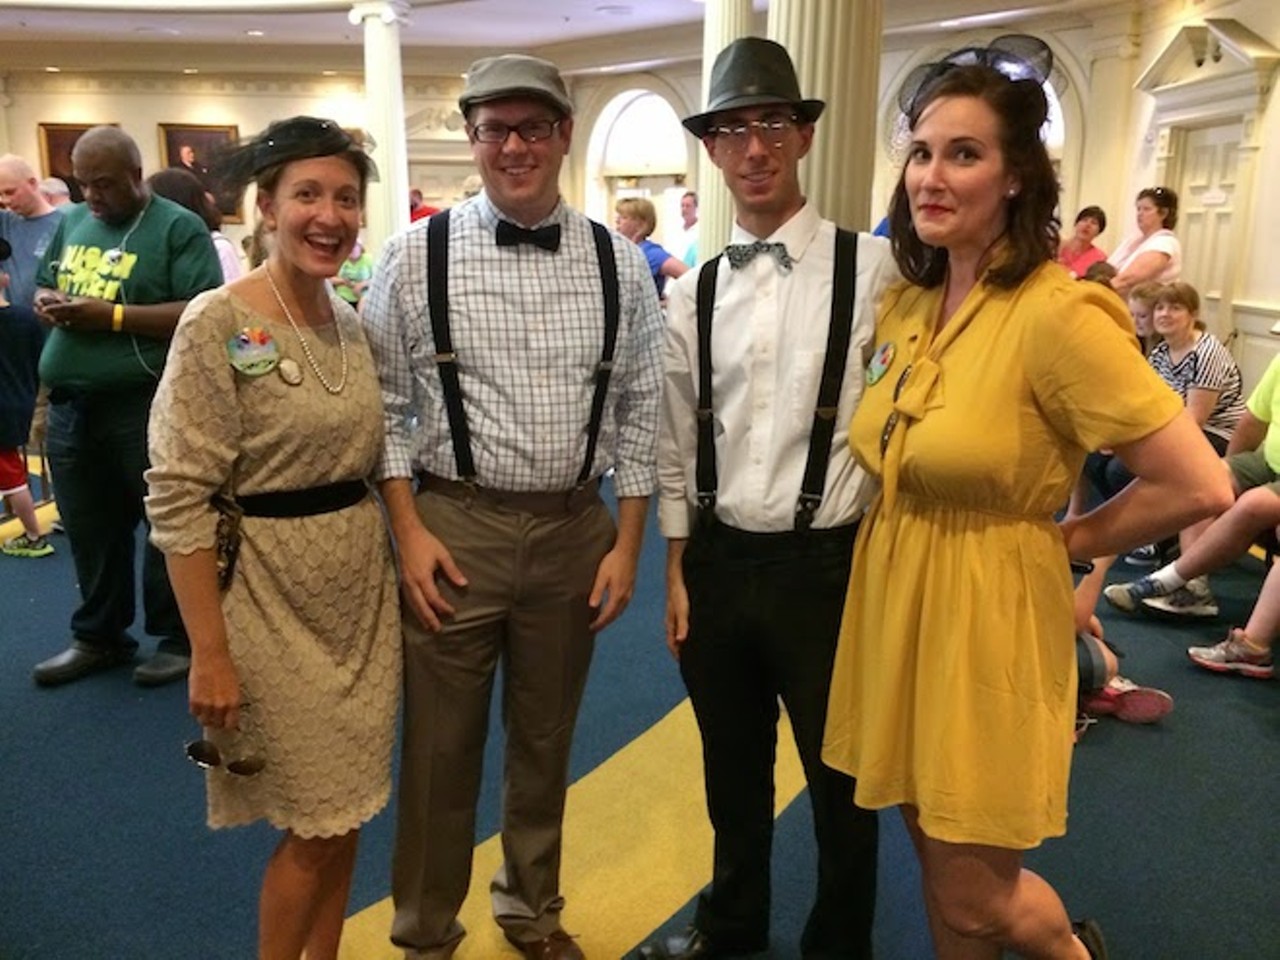 49 shots of sharp-dressed guests at Disney's Dapper Day